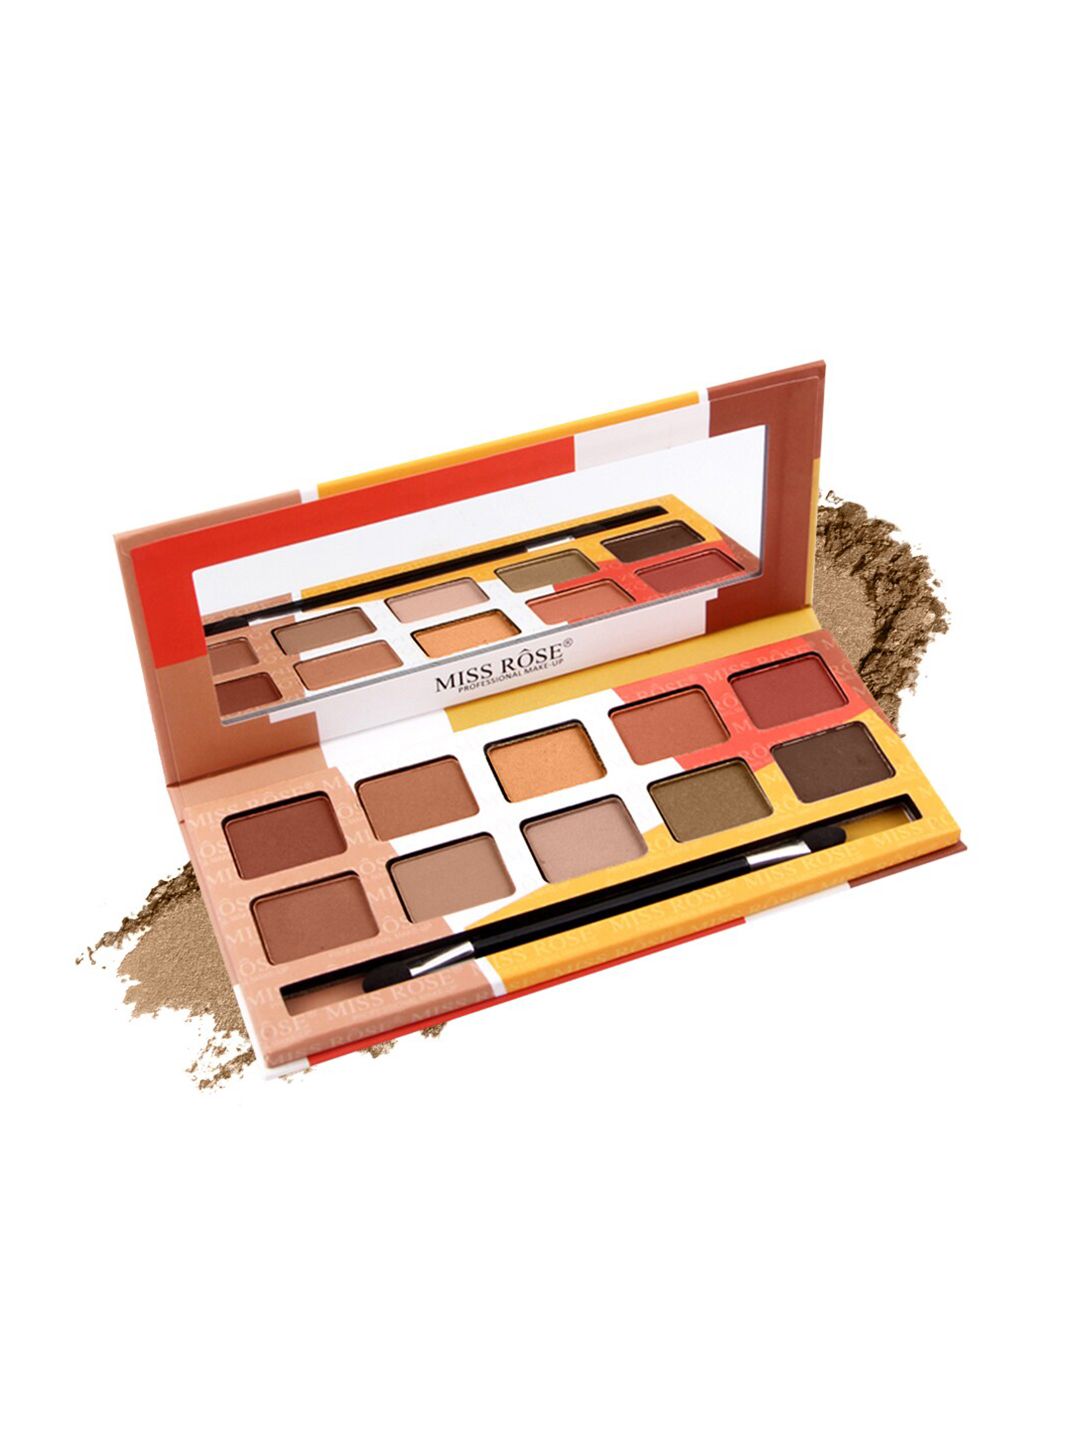 Miss Rose 12 Color Nude Eyeshadow Palette 7001-051NY 04 Price in India